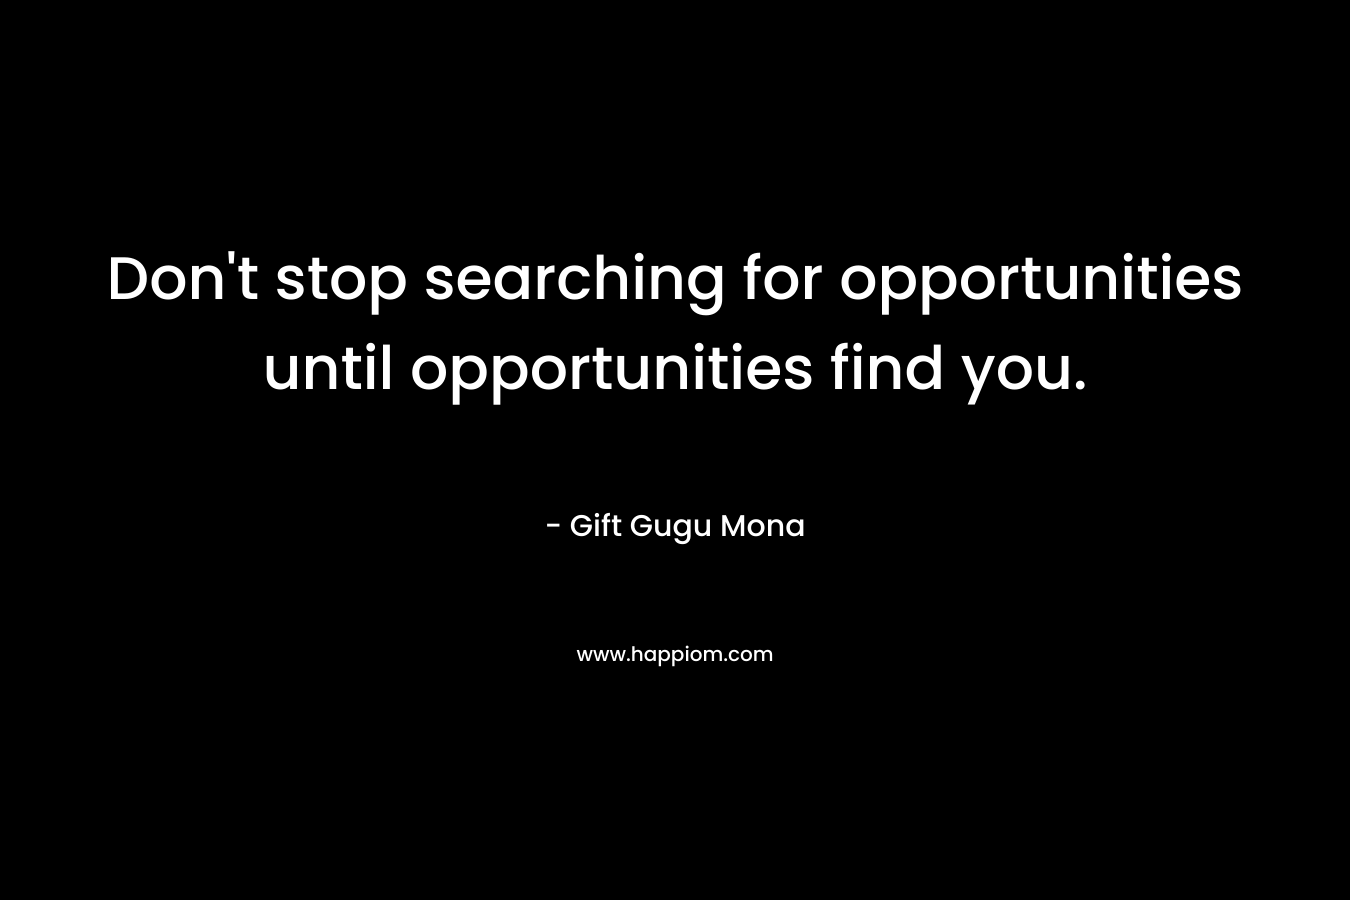 Don't stop searching for opportunities until opportunities find you.